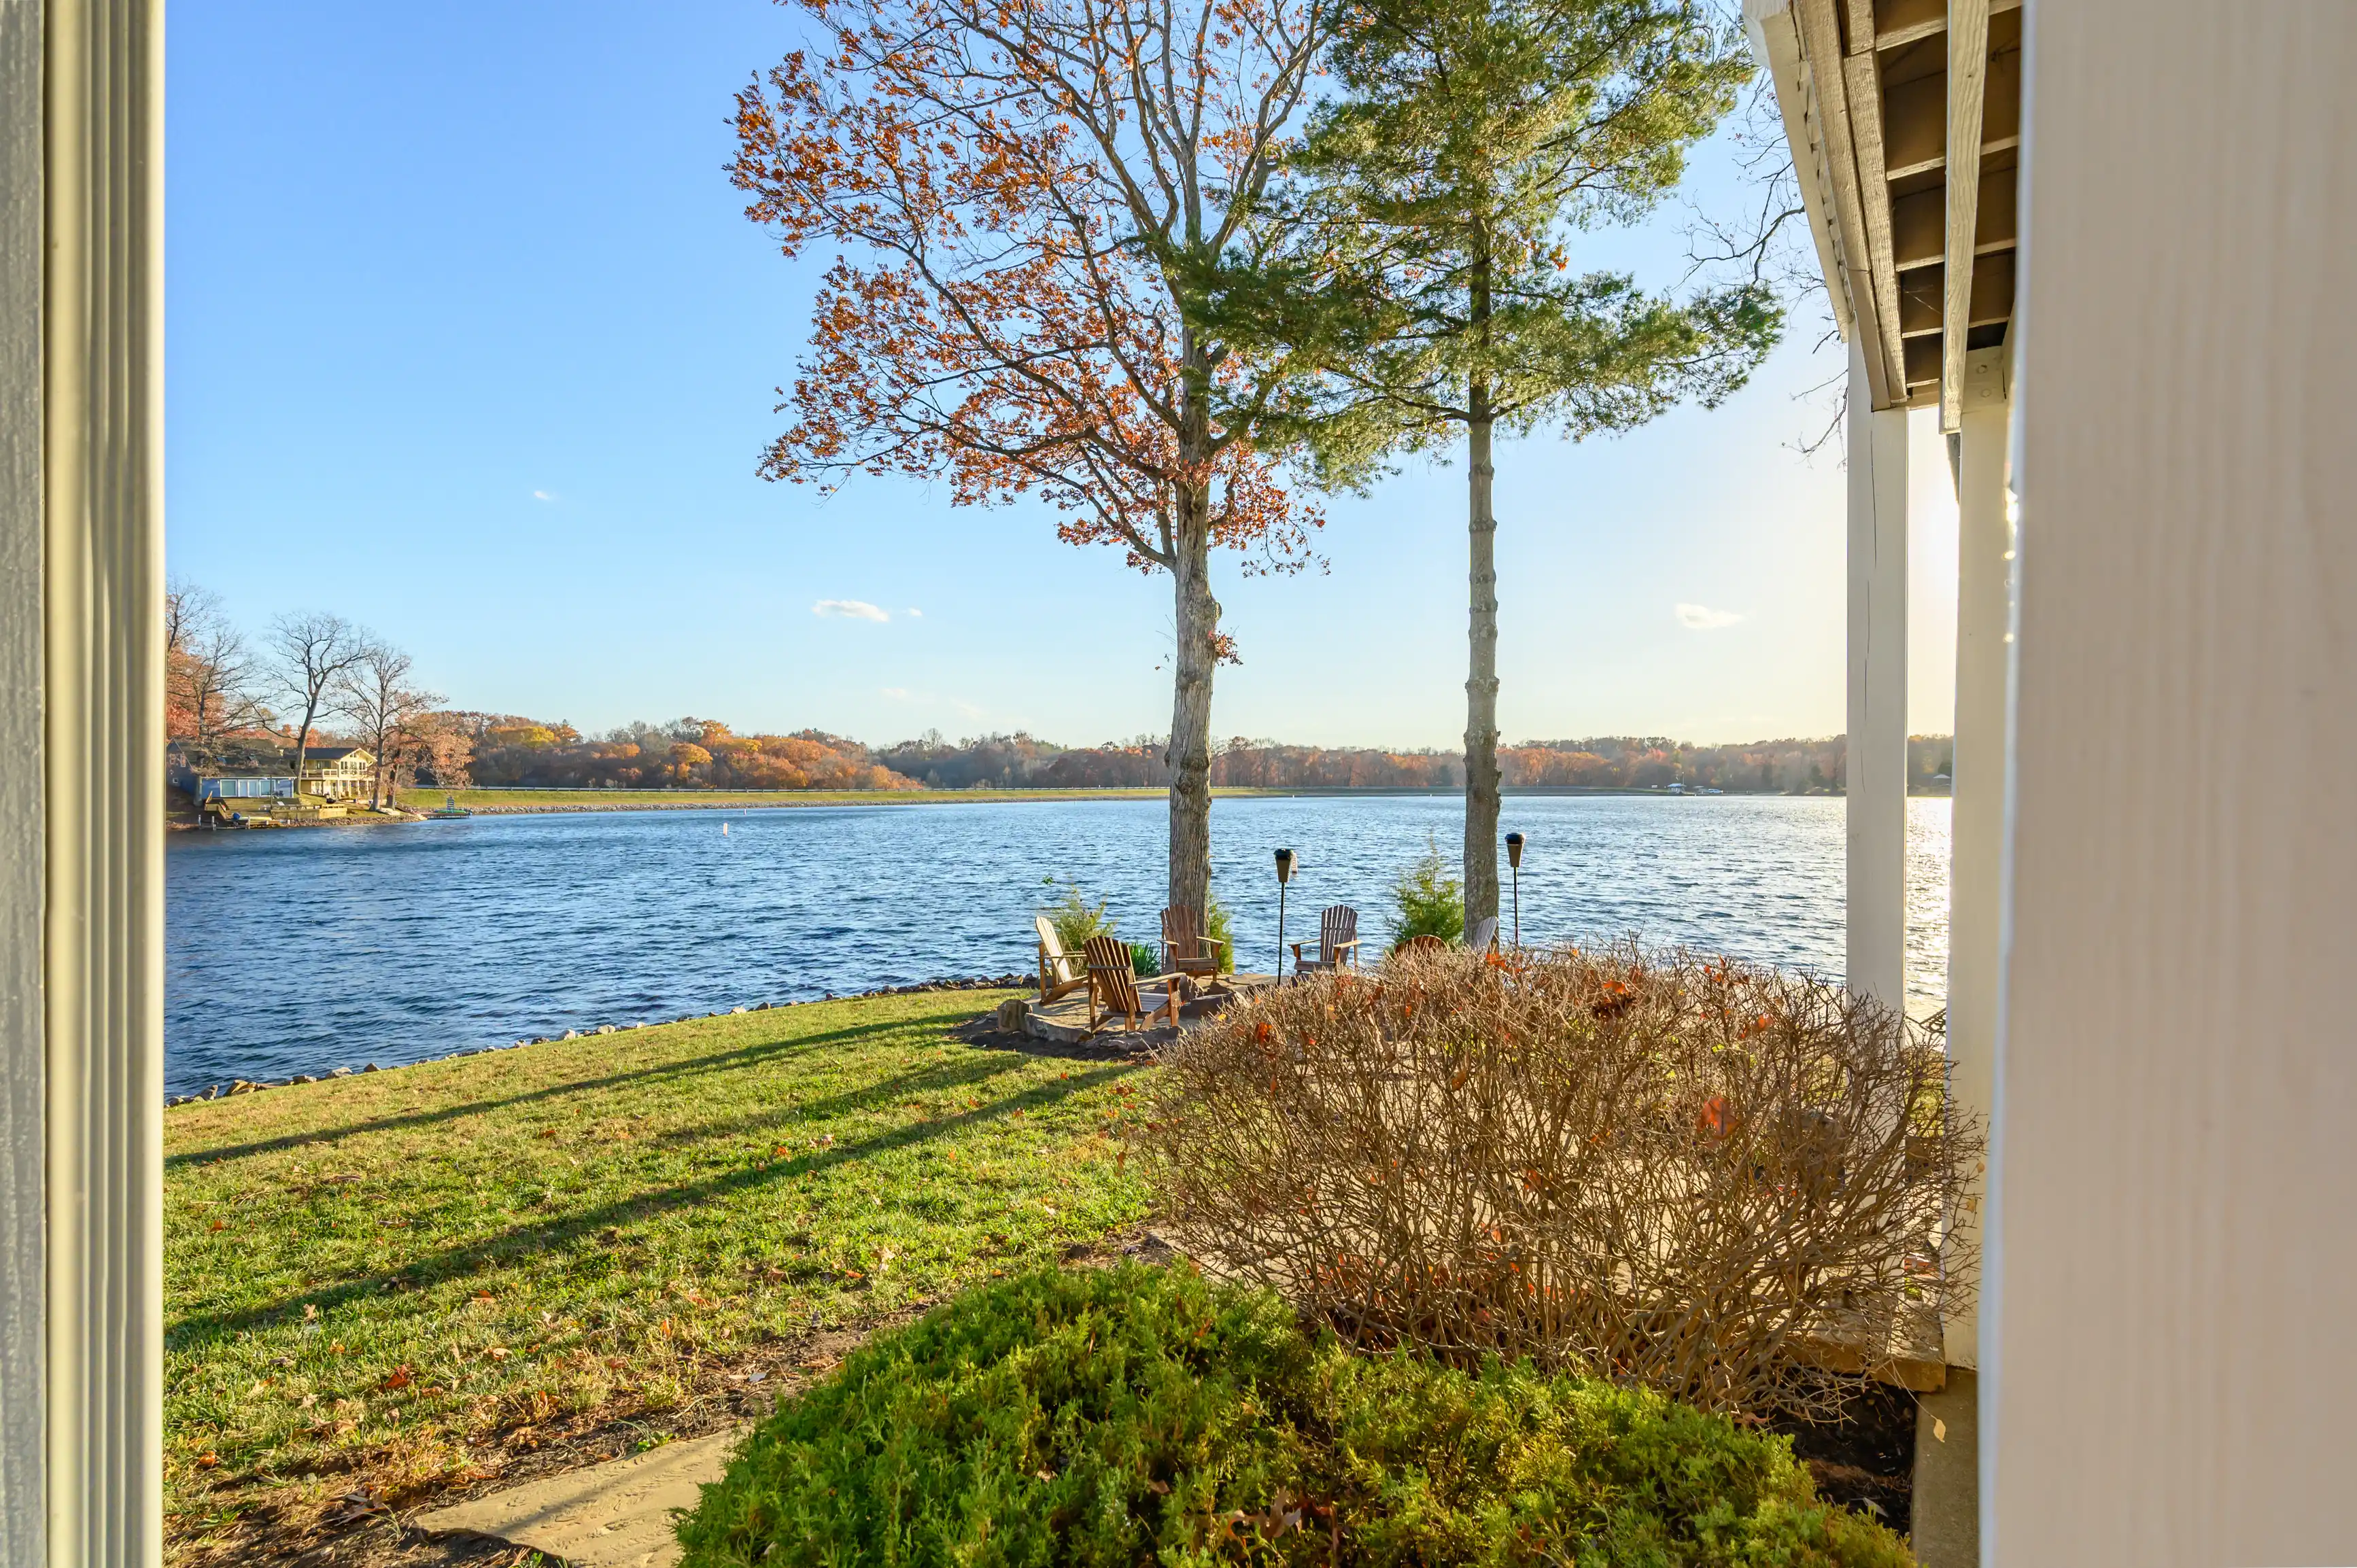 Lake view from a backyard with Adirondack chairs by the water's edge, trees with autumn leaves, and a clear blue sky.